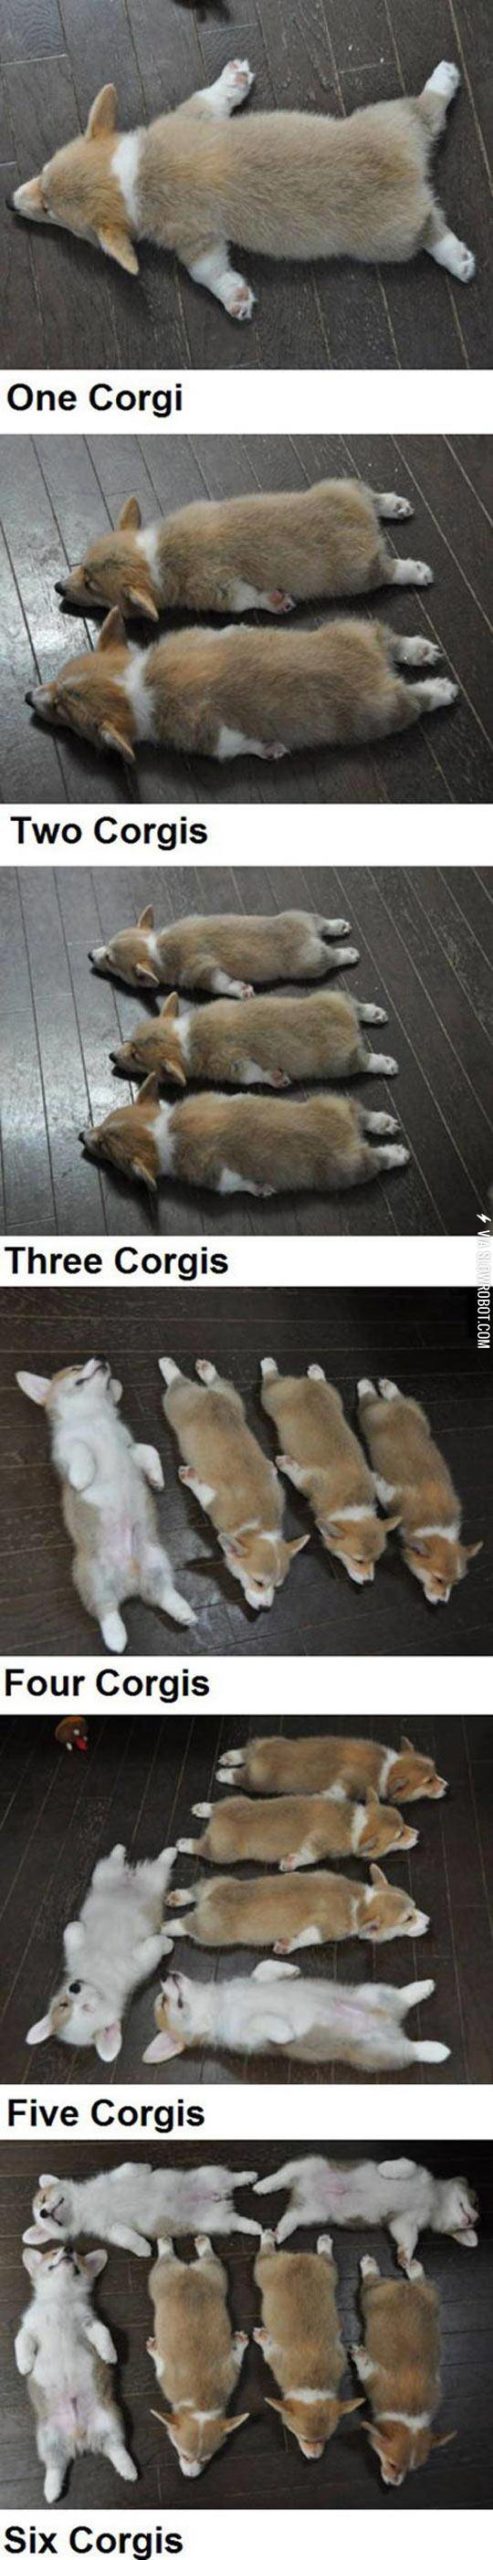 Just+Counting+With+Corgis